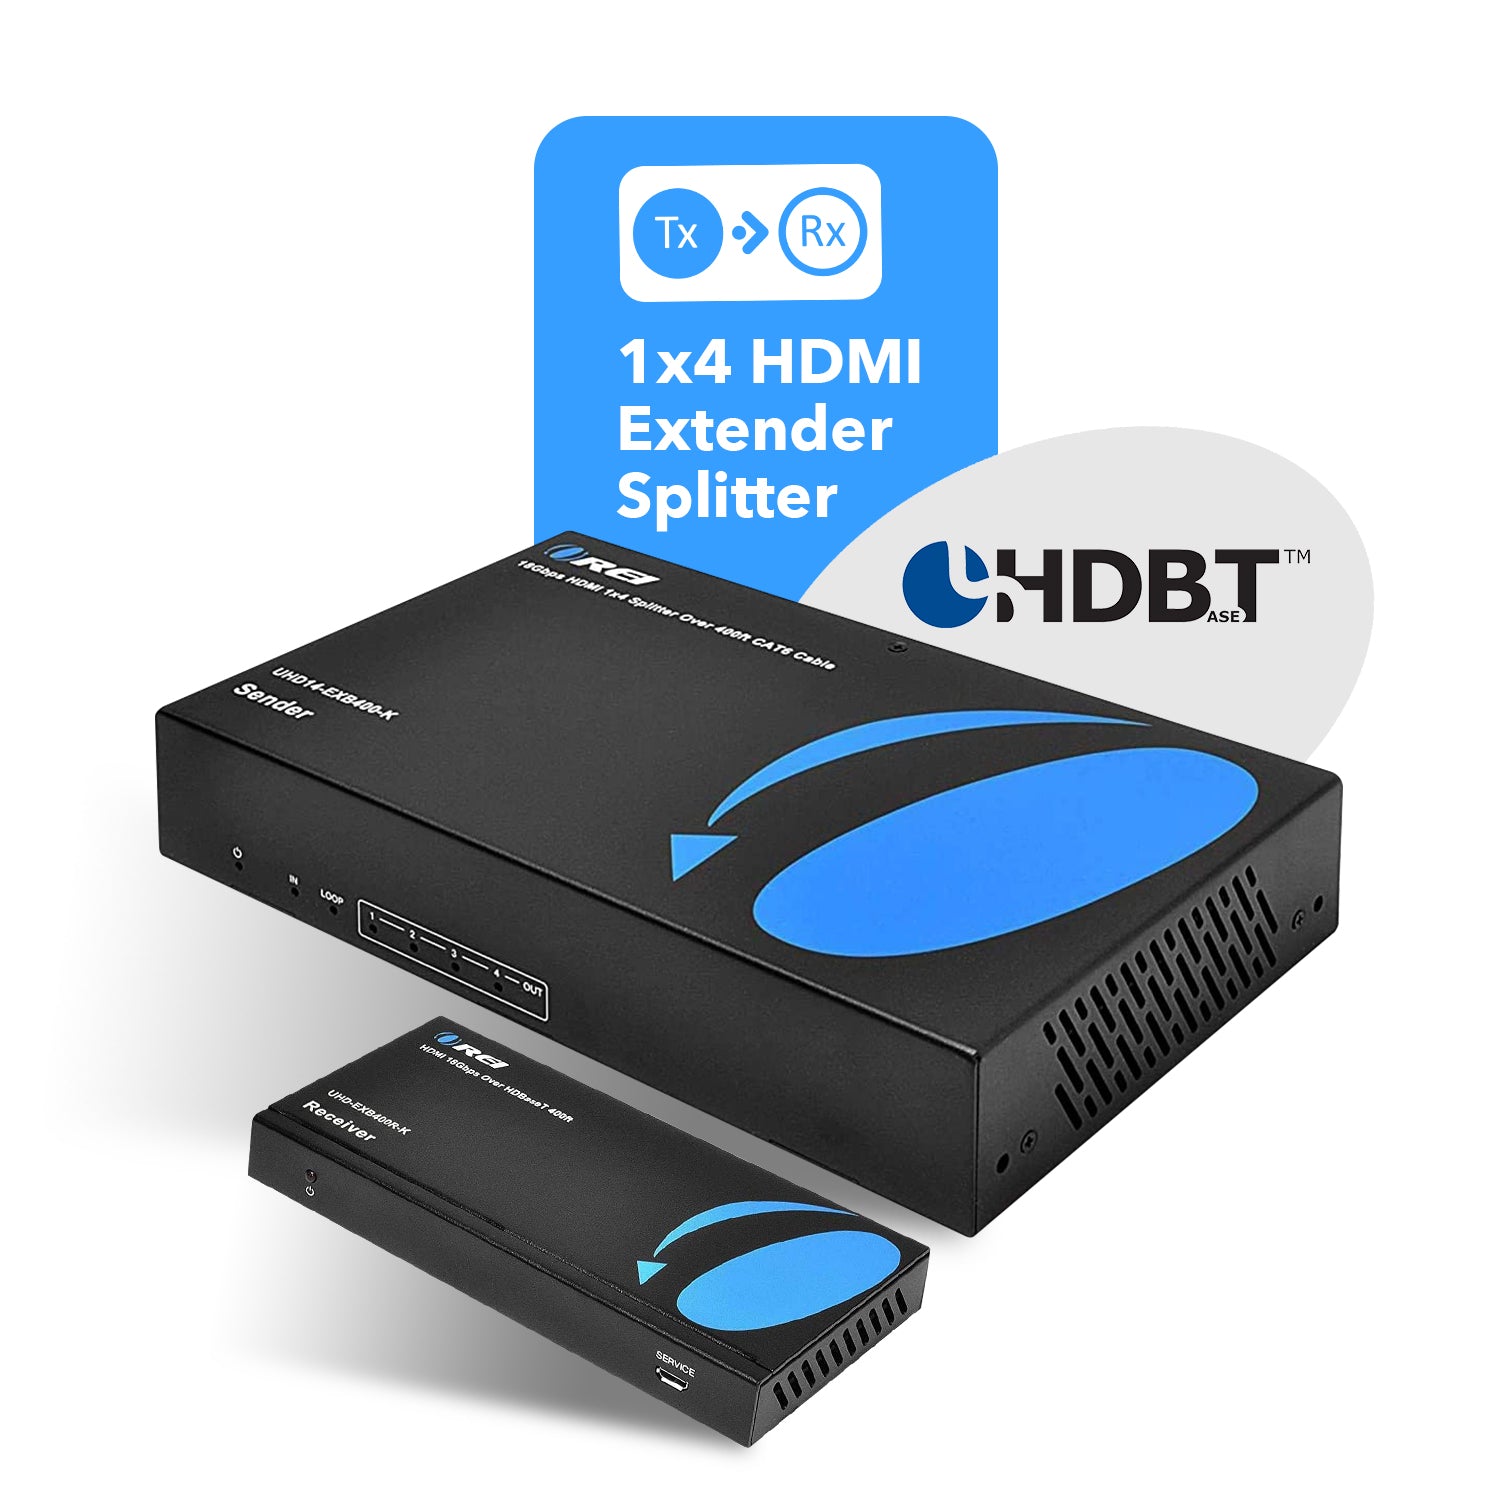 Daisy Chain HDMI Extender 1080P Up to 400 FT RX Only - J-Tech Digital